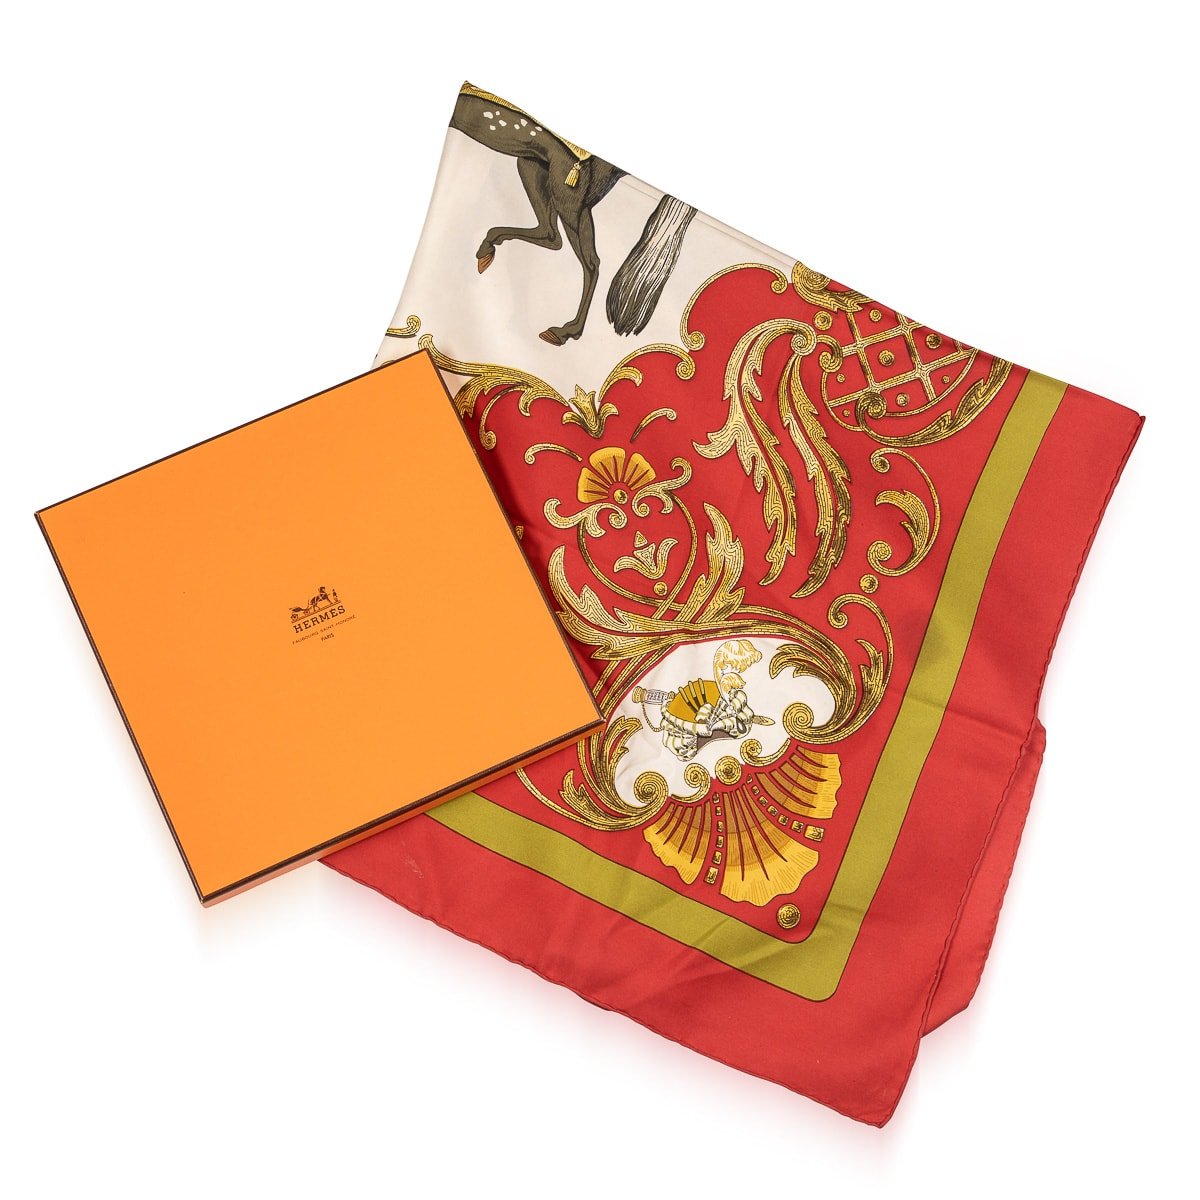 A SILK HERMES SCARF IN THE ORIGINAL BOX - OF RECENT PRODUCTION ...